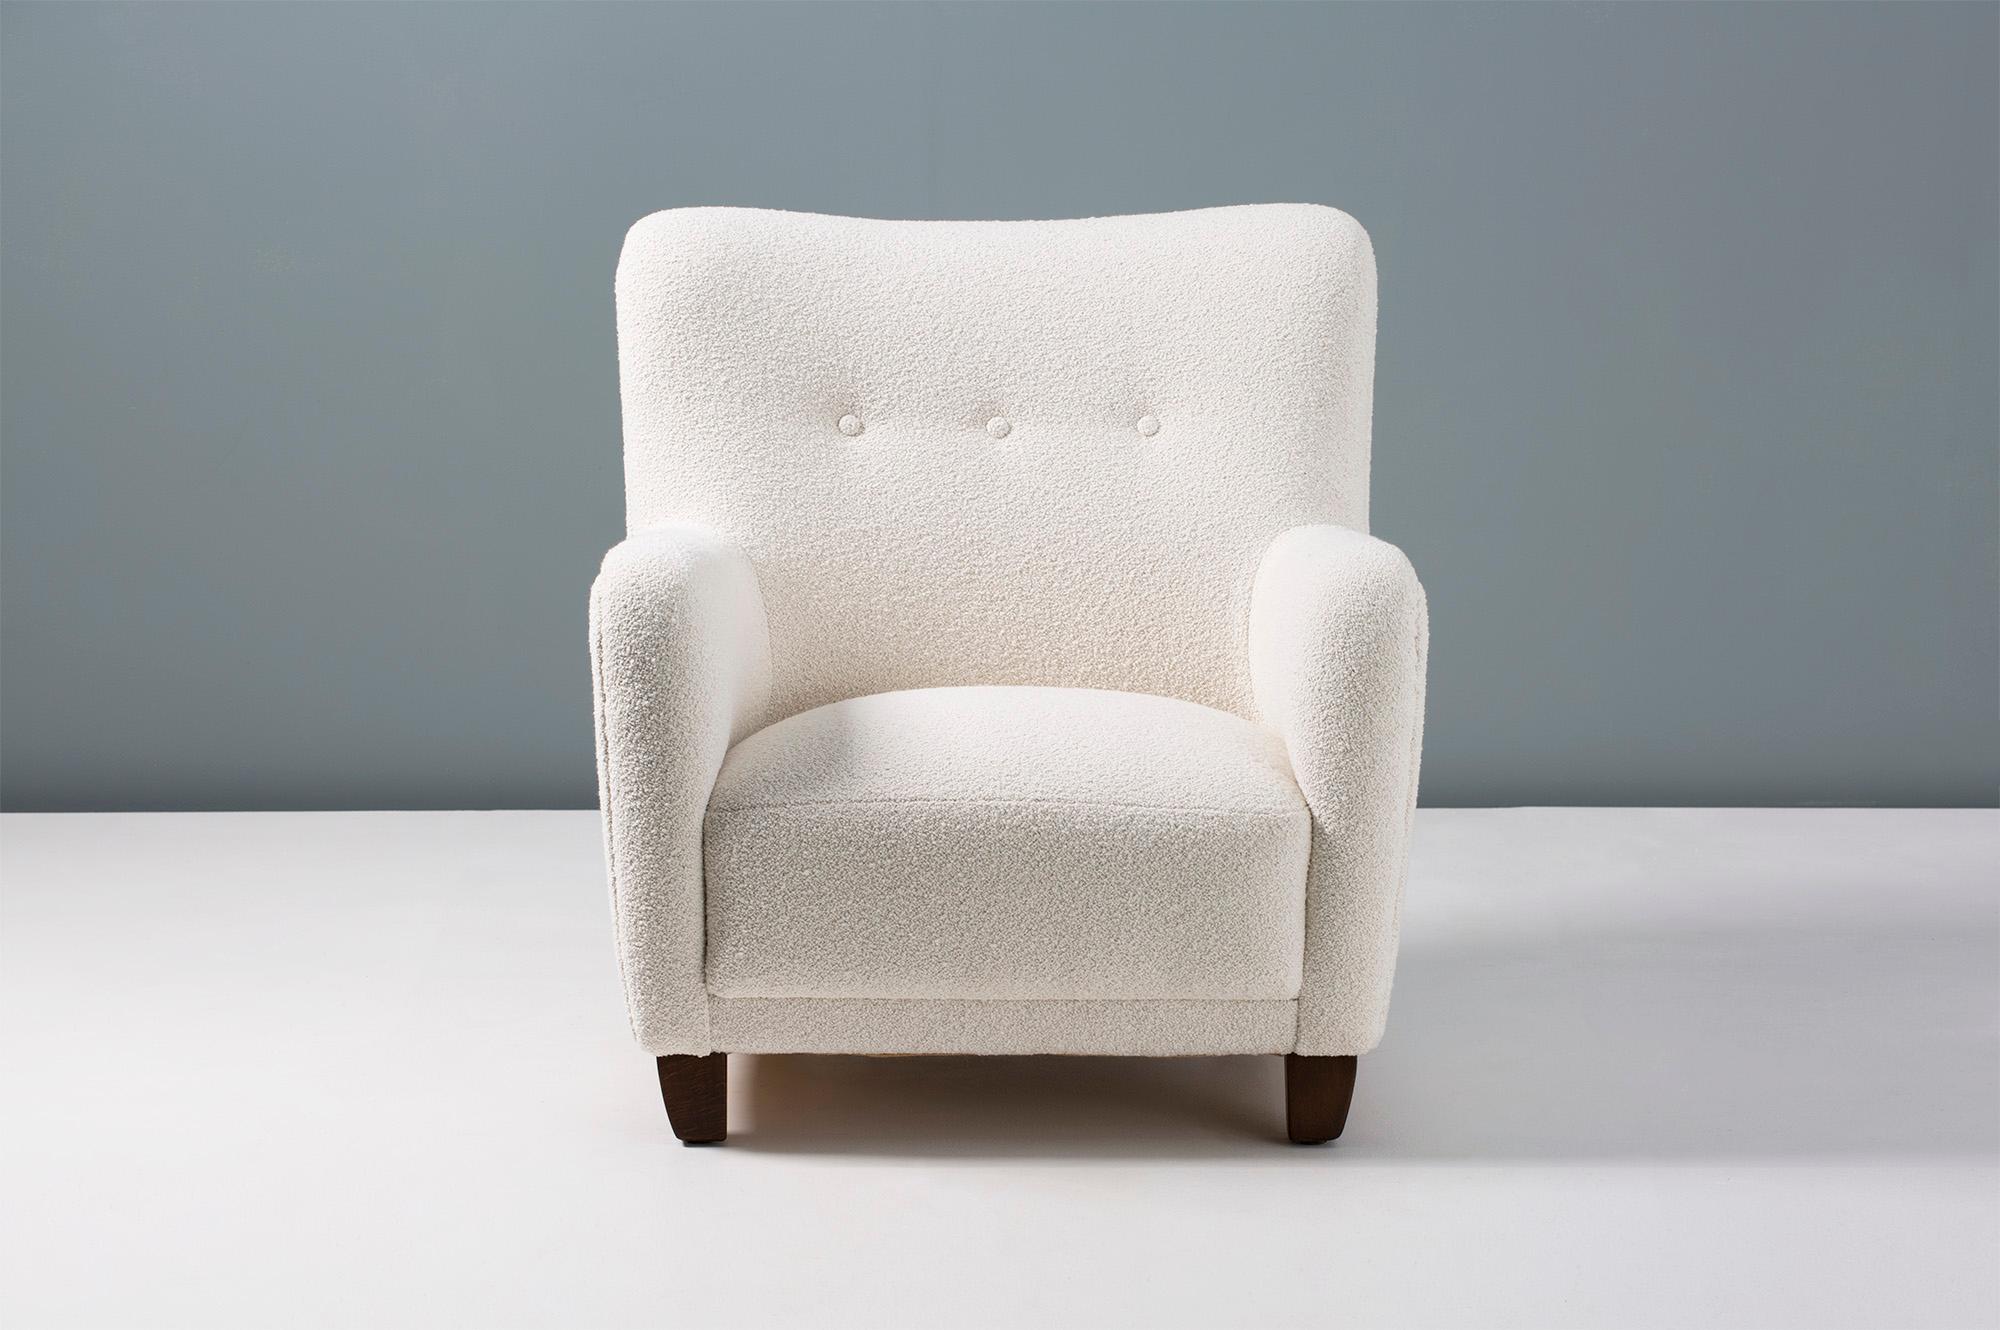 1940s vintage armchair in the manner of Fritz Hansen, produced in Denmark by FDB Mobler. The legs are stained beechwood and the chair has been reupholstered in luxurious bouclé fabric composed of cotton and wool.

Pair available by request.